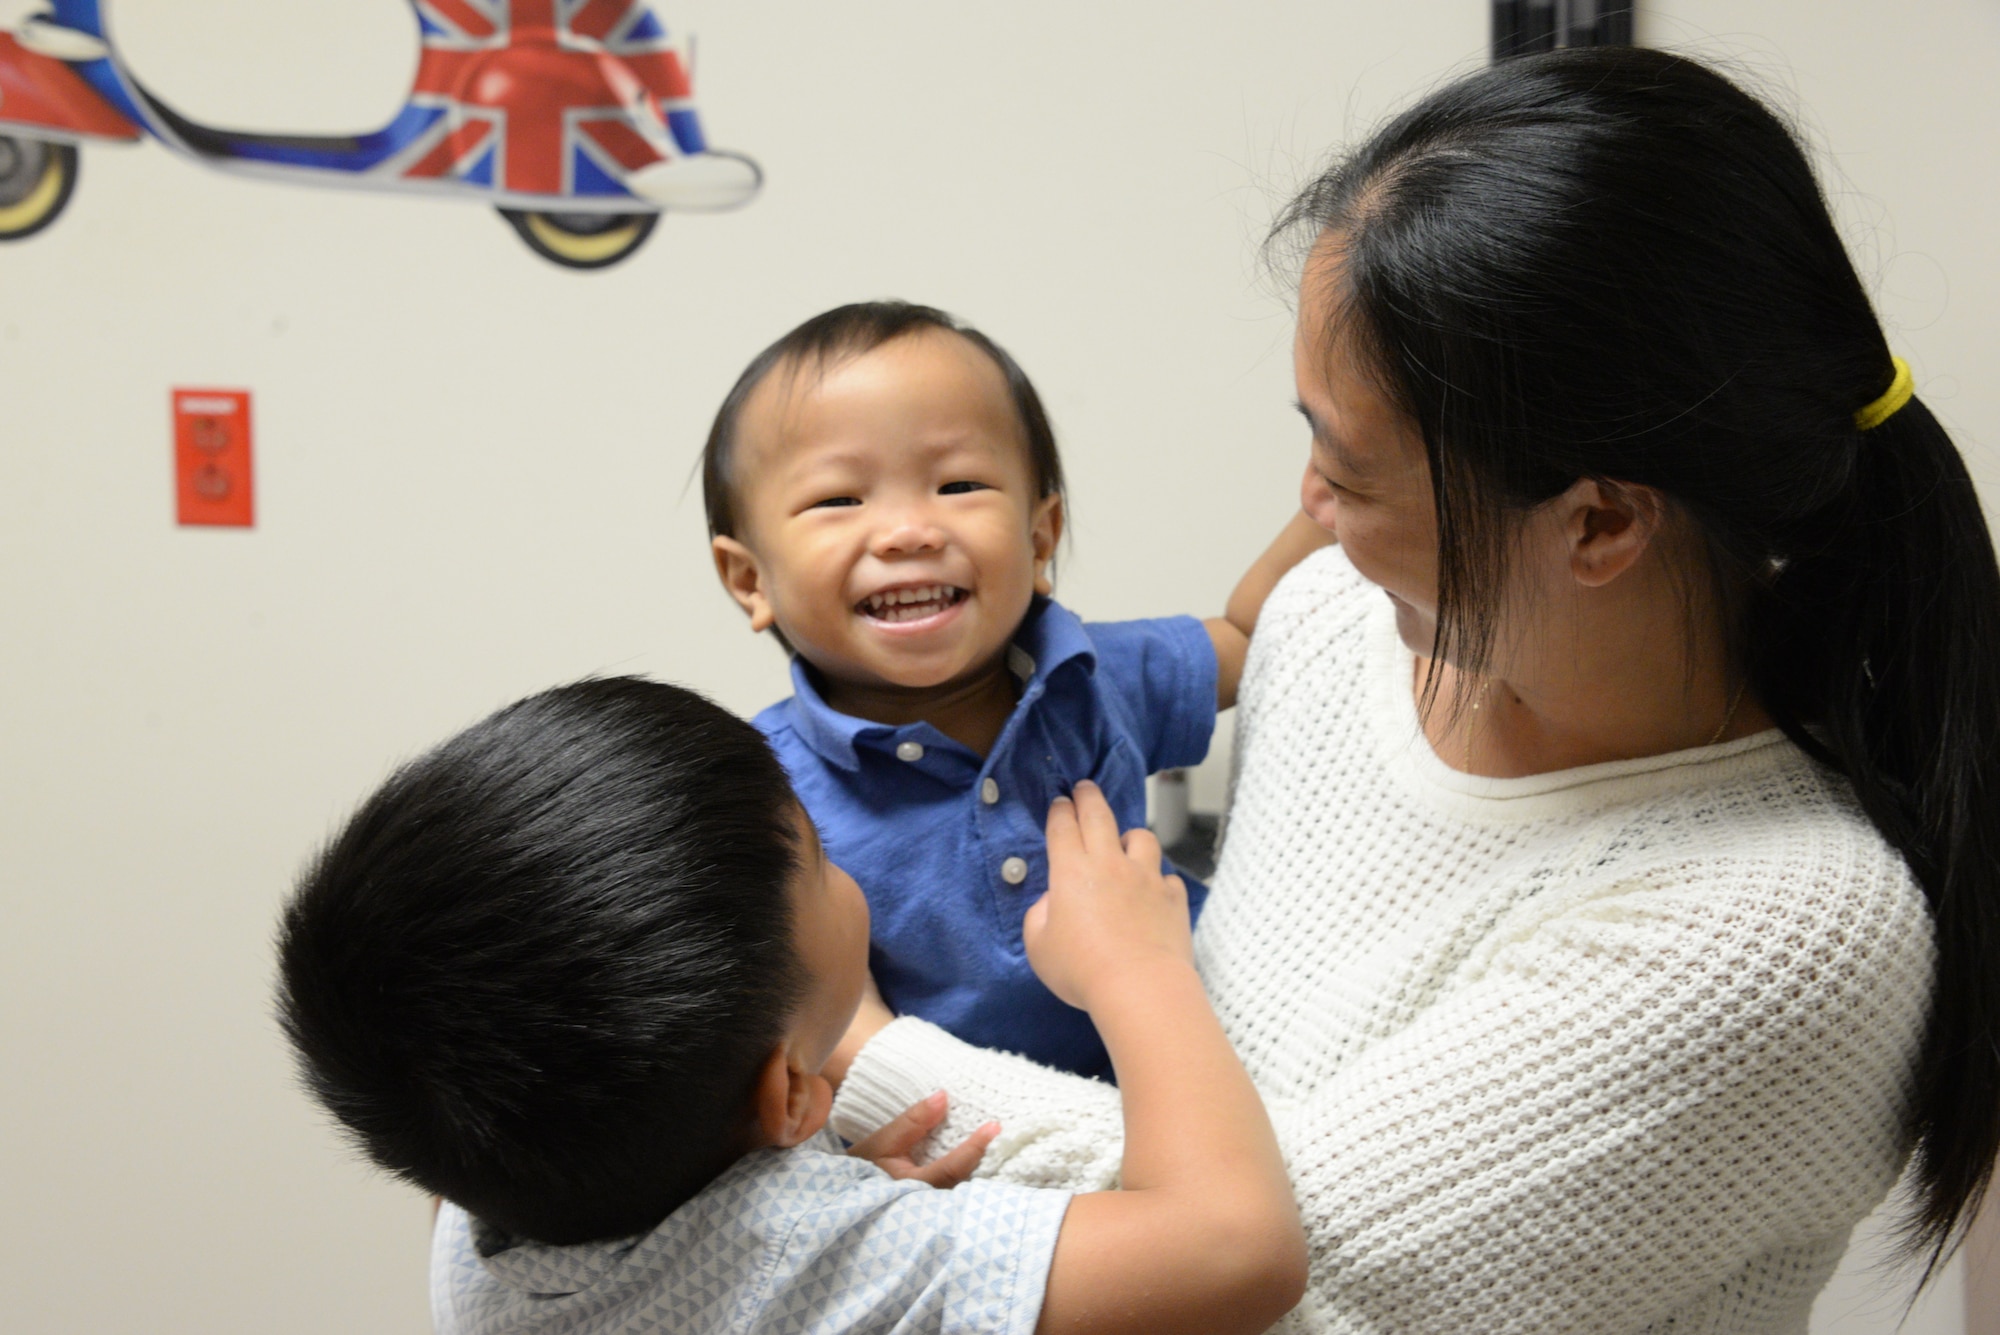 Levi, center, is held by his mother, Jolene Abaya, and comforted by his big brother, Roen, March 30, 2018, before a check-up at the David Grant USAF Medical Center Pediatric Clinic at Travis Air Force Base, Calif. The Pediatric Clinic cares for 4,500 military children from newborns up to 18 years old. (U.S. Air Force photo by Staff Sgt. Amber Carter).